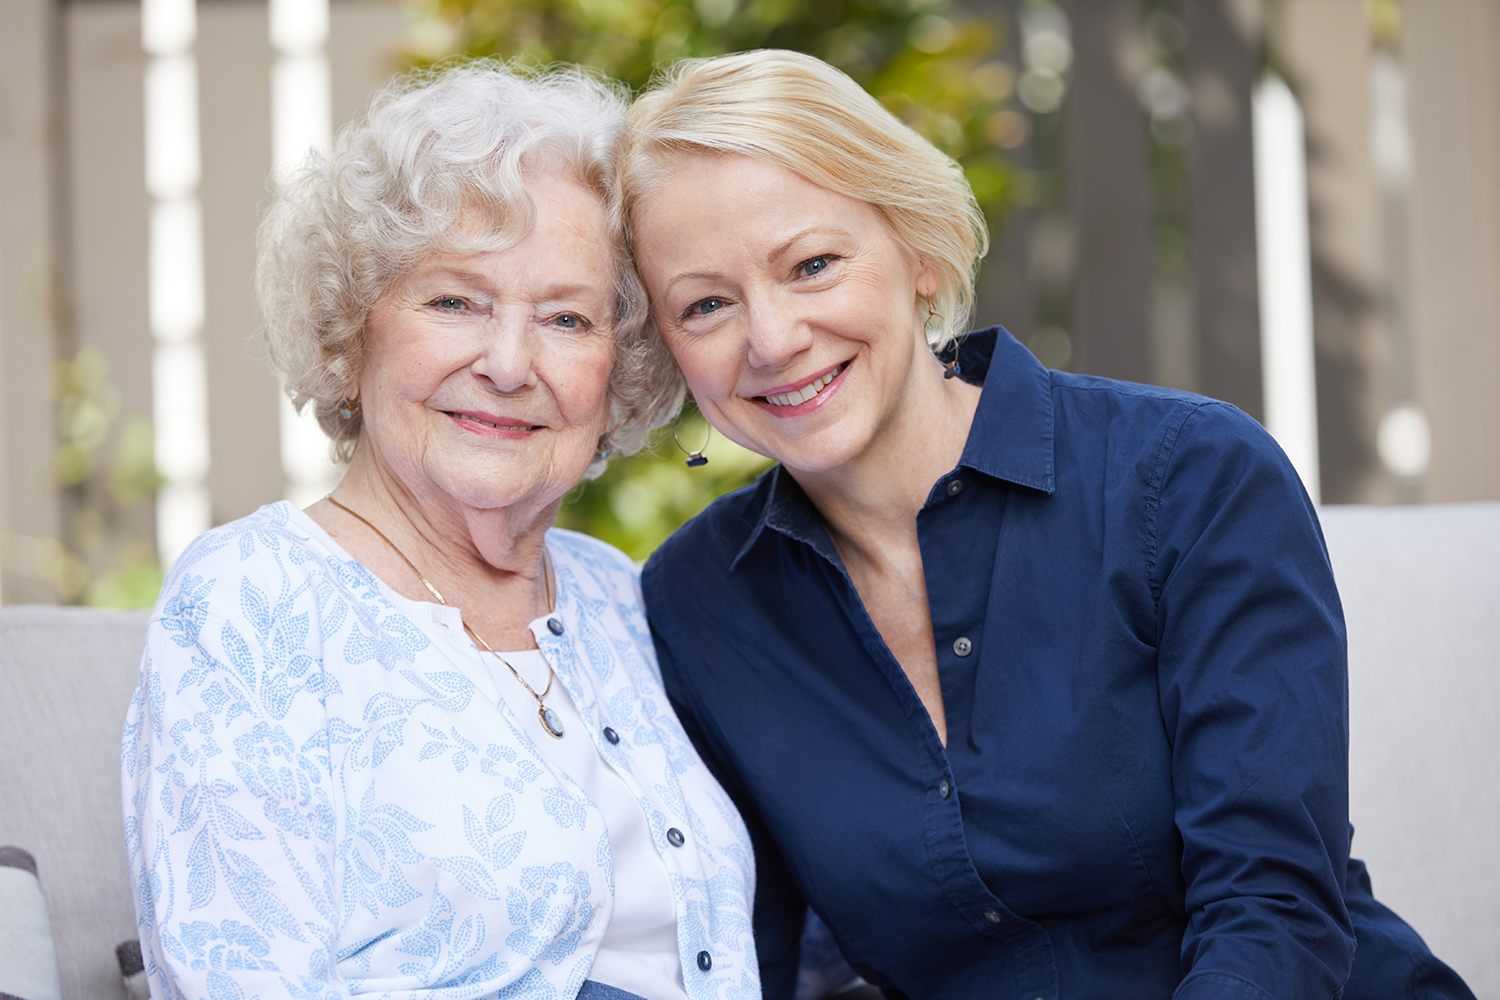 Two women smiling with arms around one another